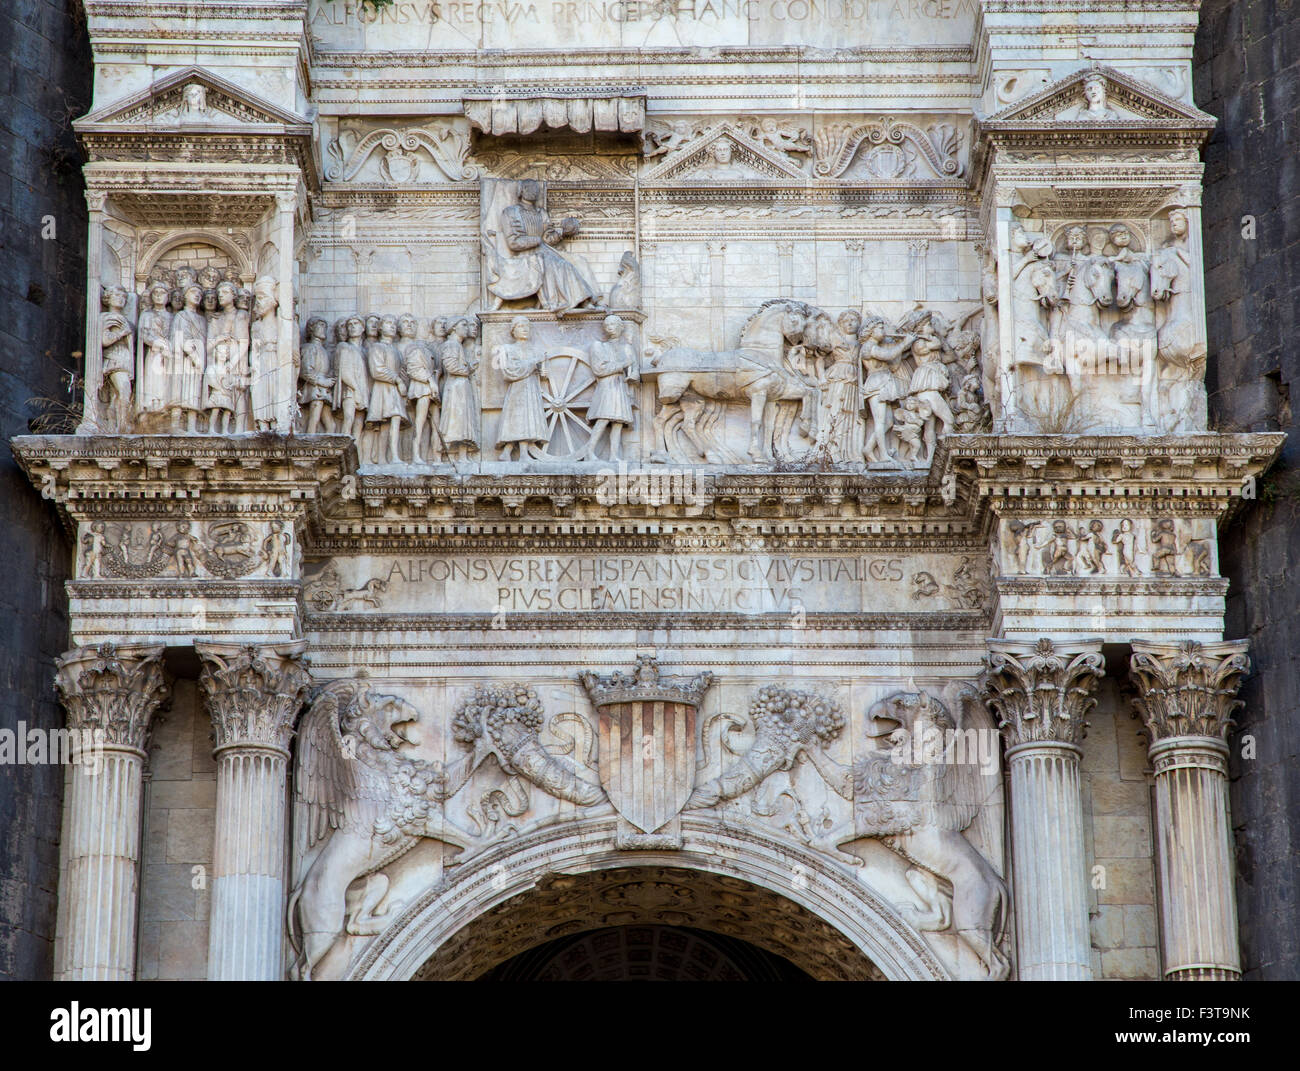 Carvings over the entrance way to Castel Nuovo, Naples, Italy Stock Photo